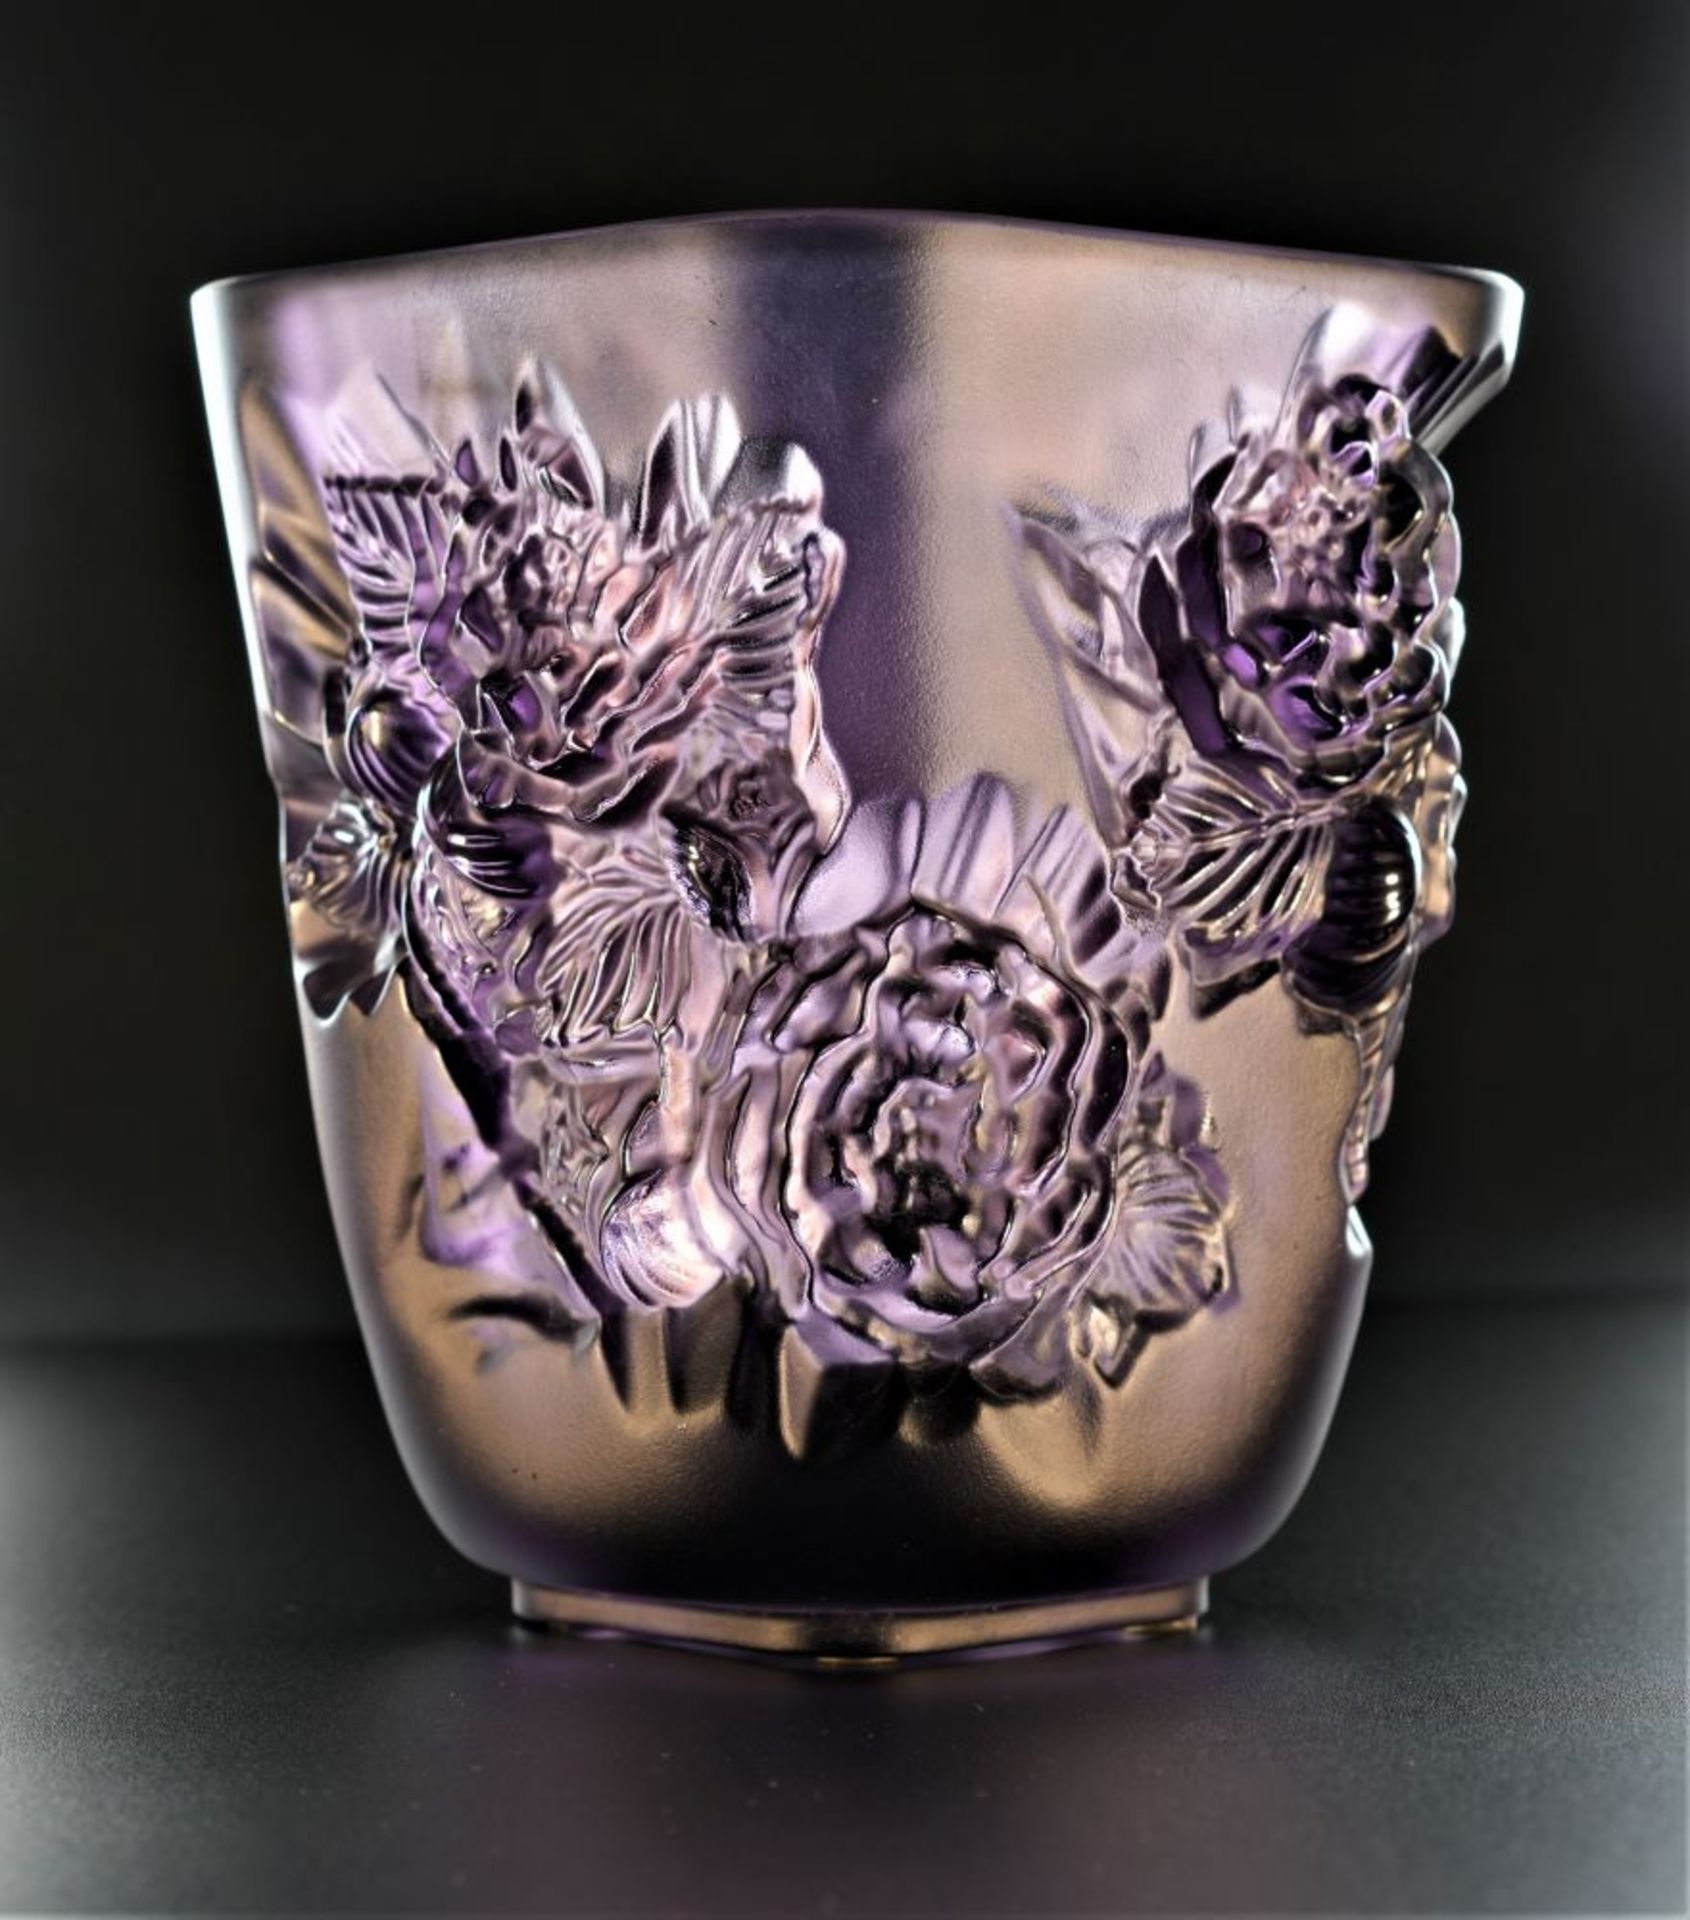 A LALIQUE Pivoines Small Vase in Purple Crystal depicting Peony Flowers. Product Code: 10708600. H - Image 2 of 3